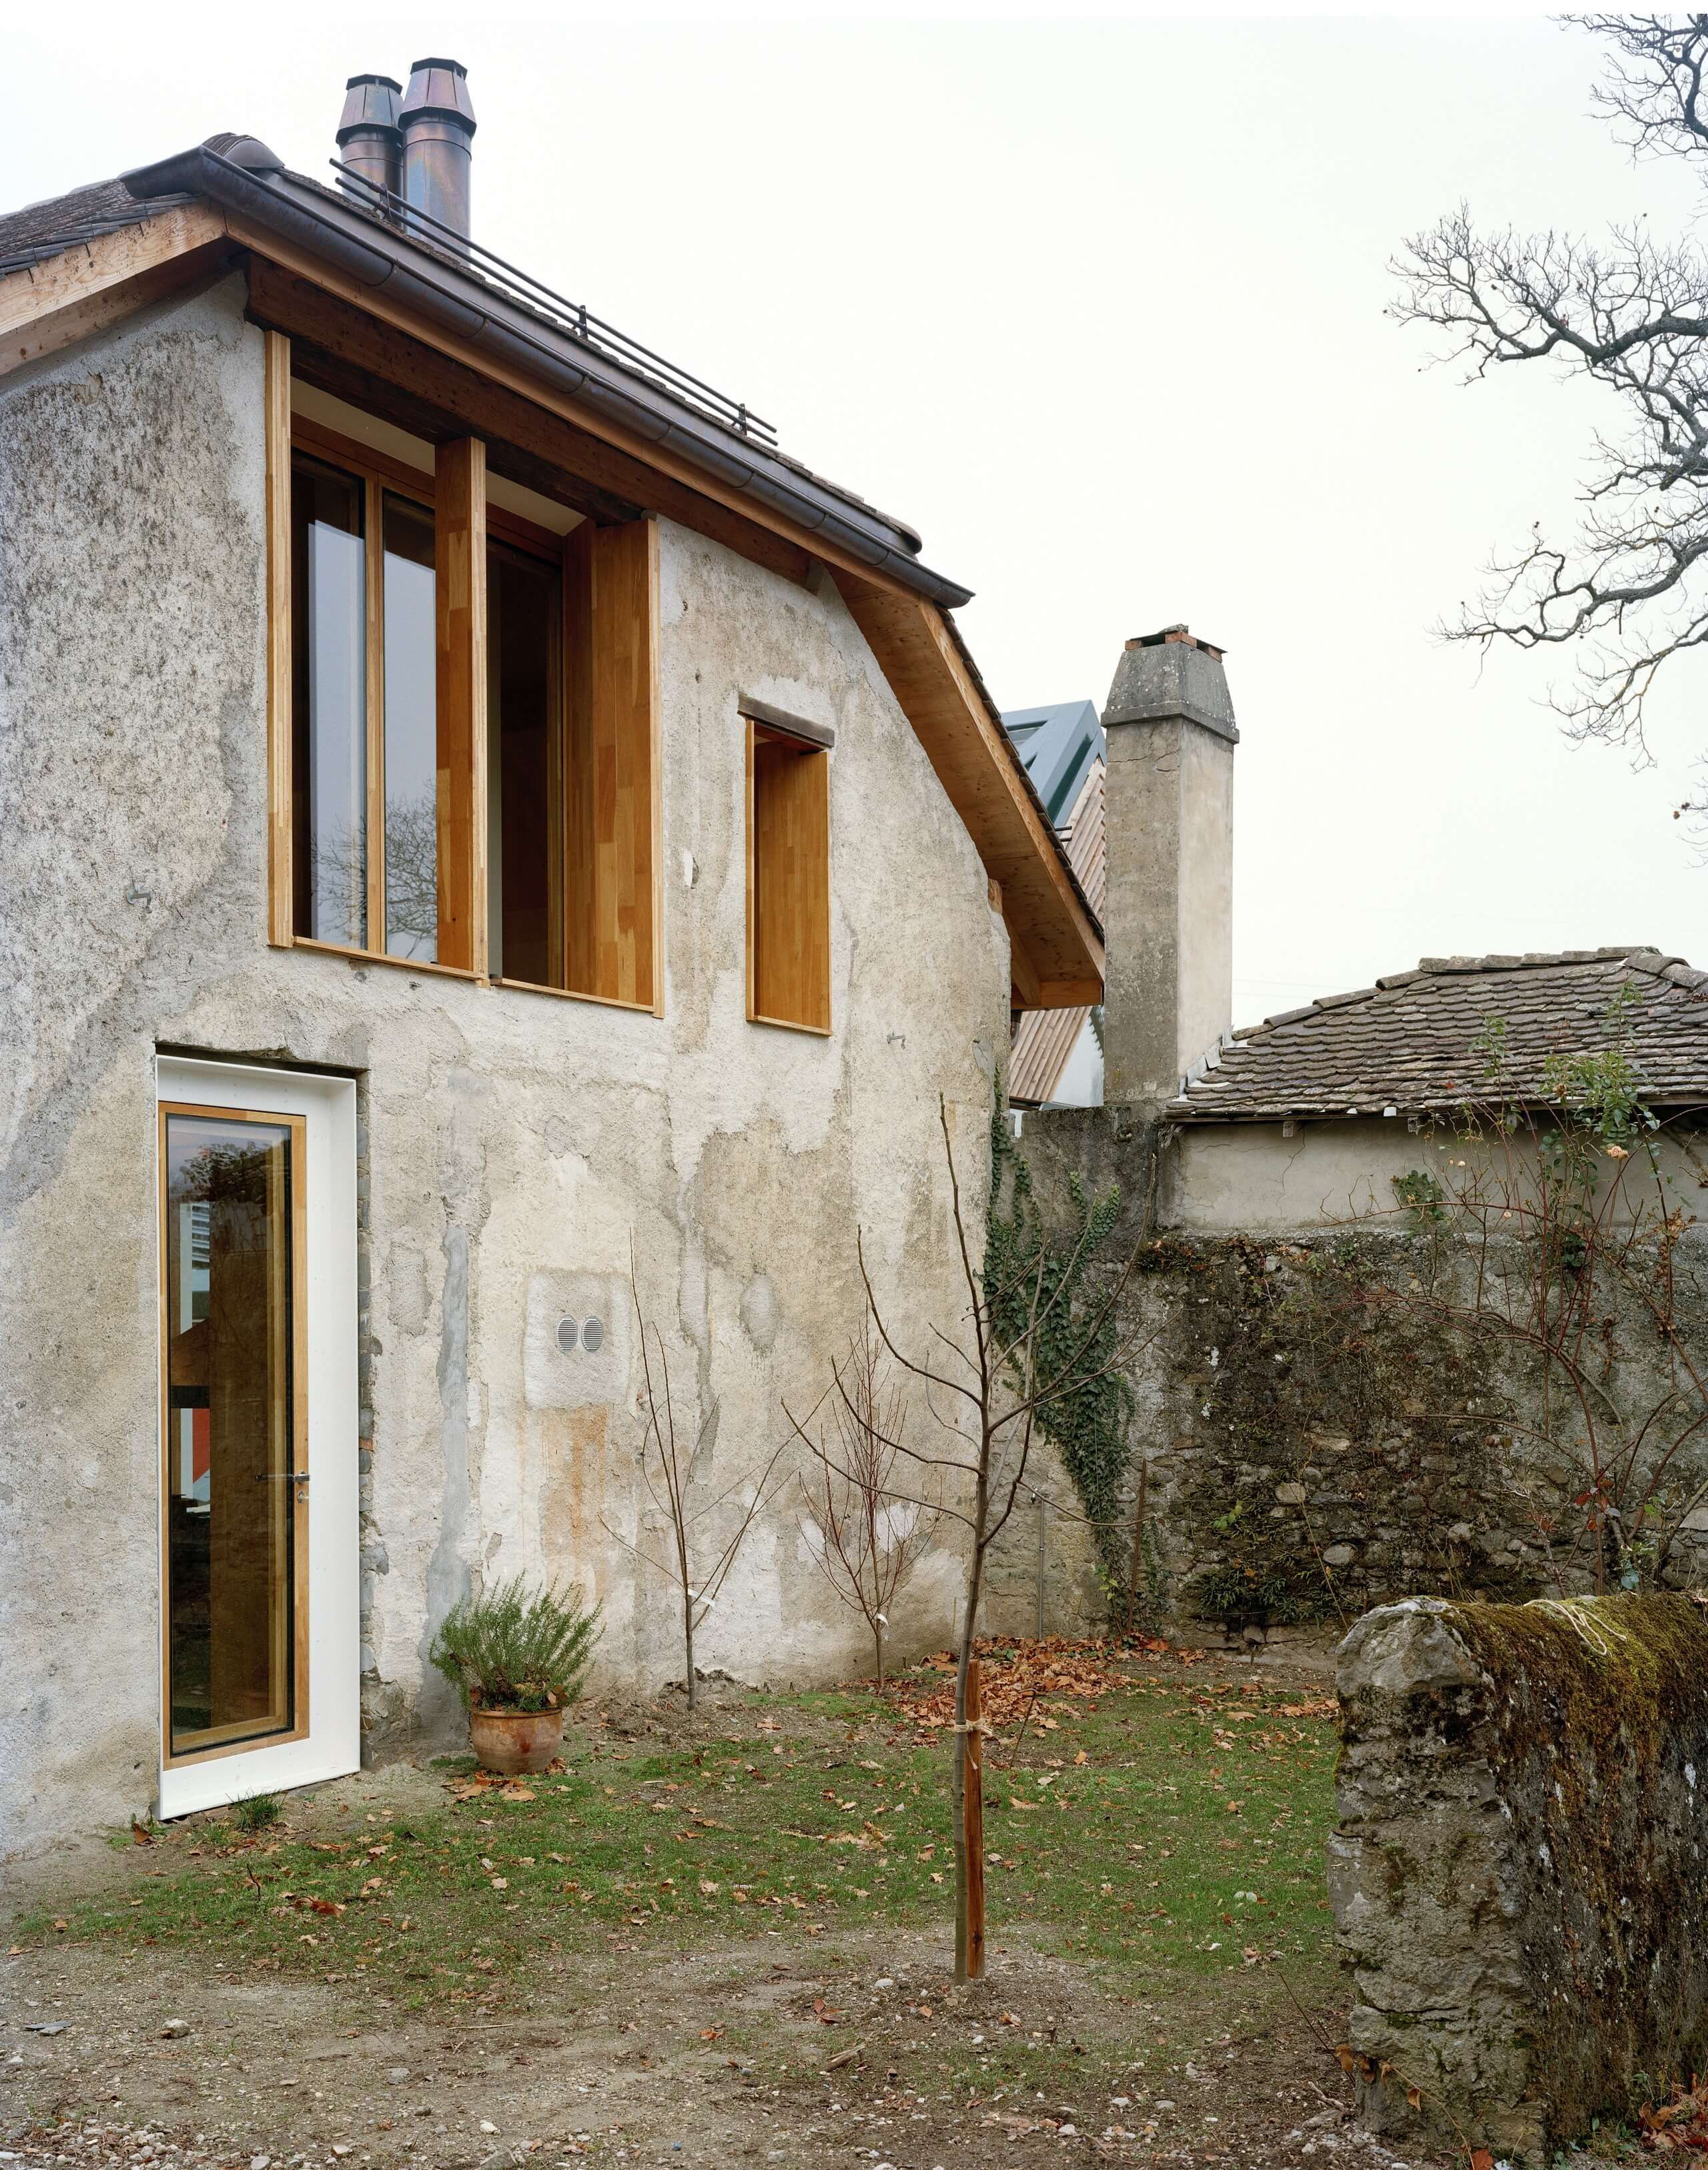 Two Houses in Chigny by dieterdietz.org